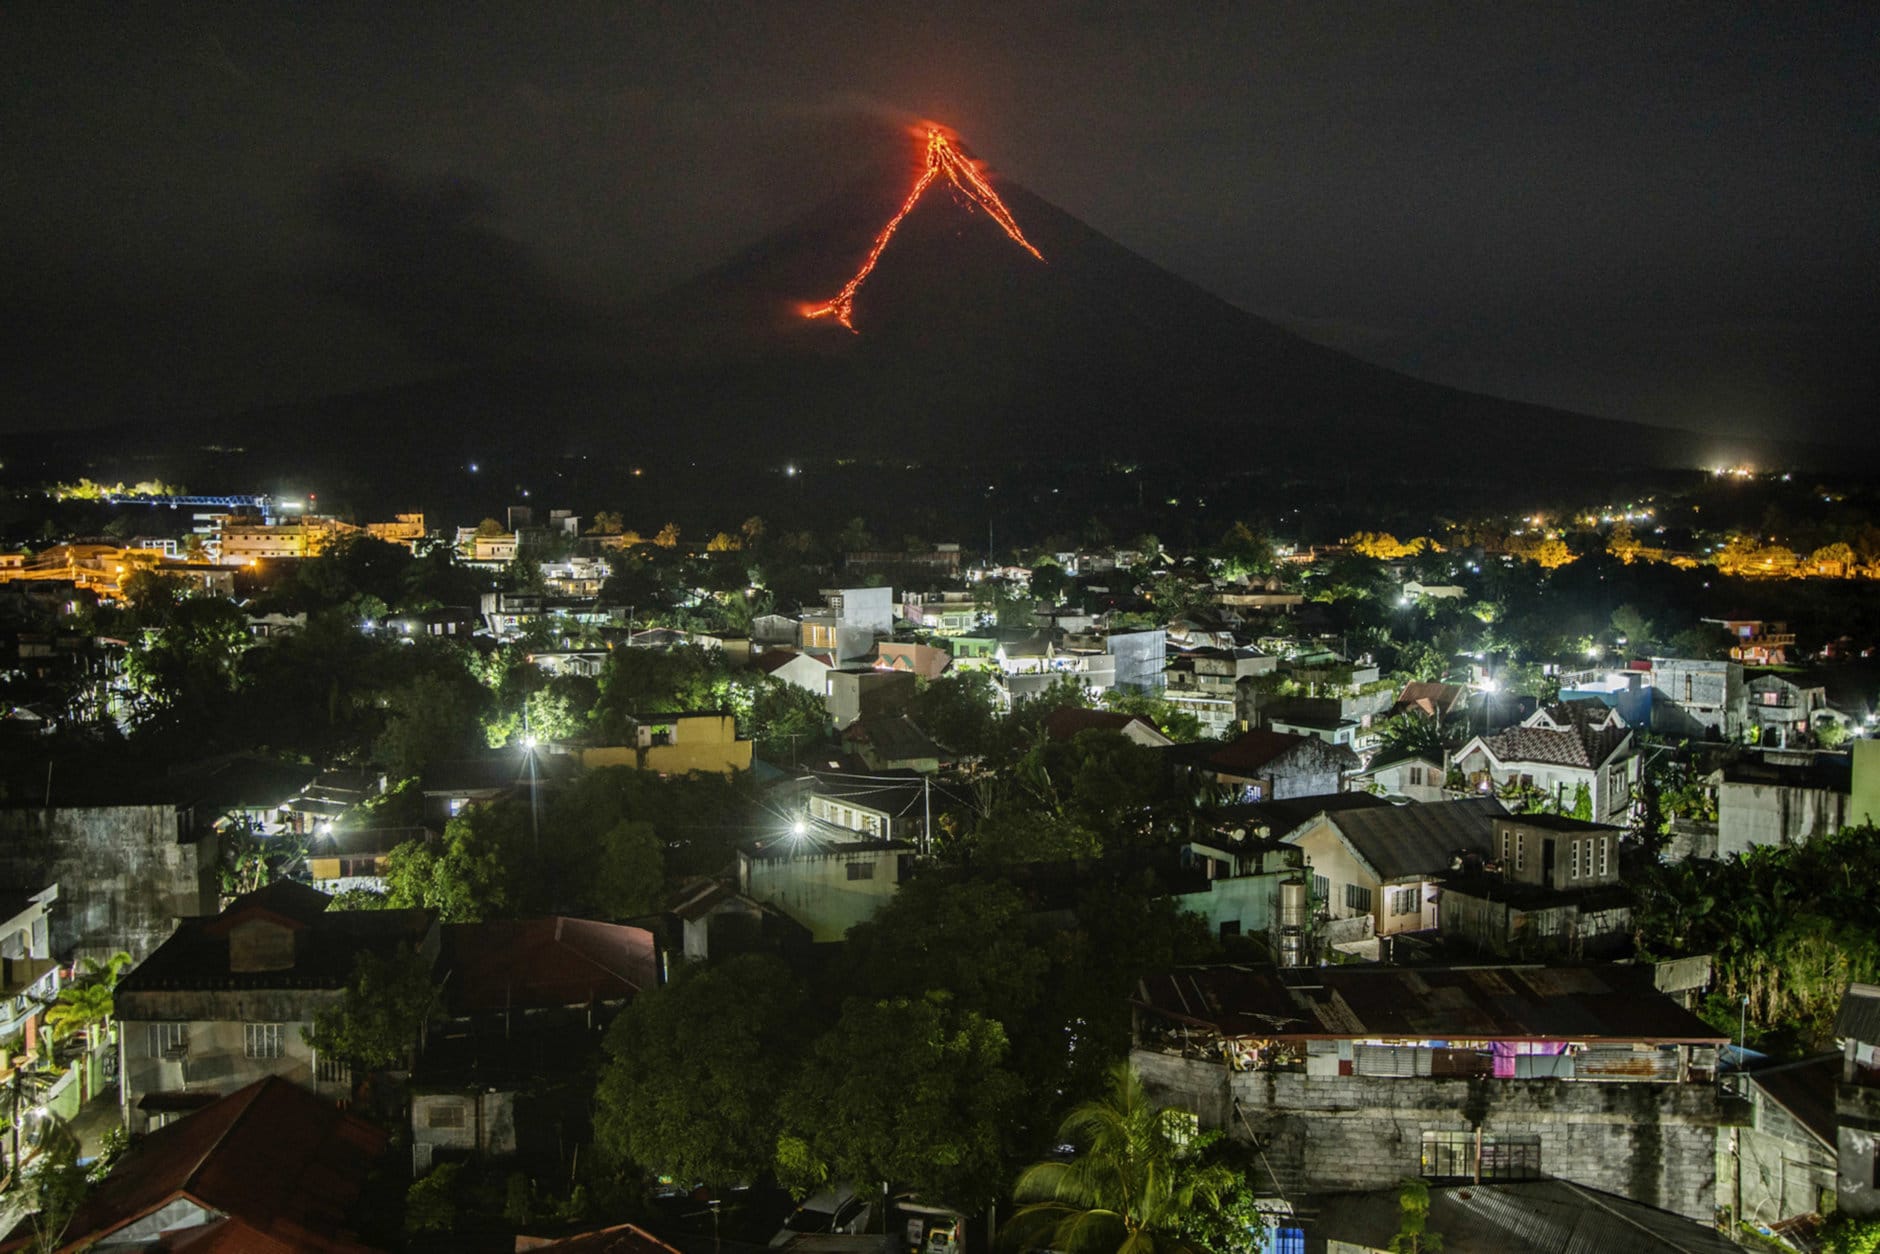 Lava flows down the slopes of the Mayon volcano in the Philippines, seen from Legazpi city, 340 kilometers (210 miles) southeast of Manila, on Jan. 16, 2018. (AP Photo/Dan Amaranto)